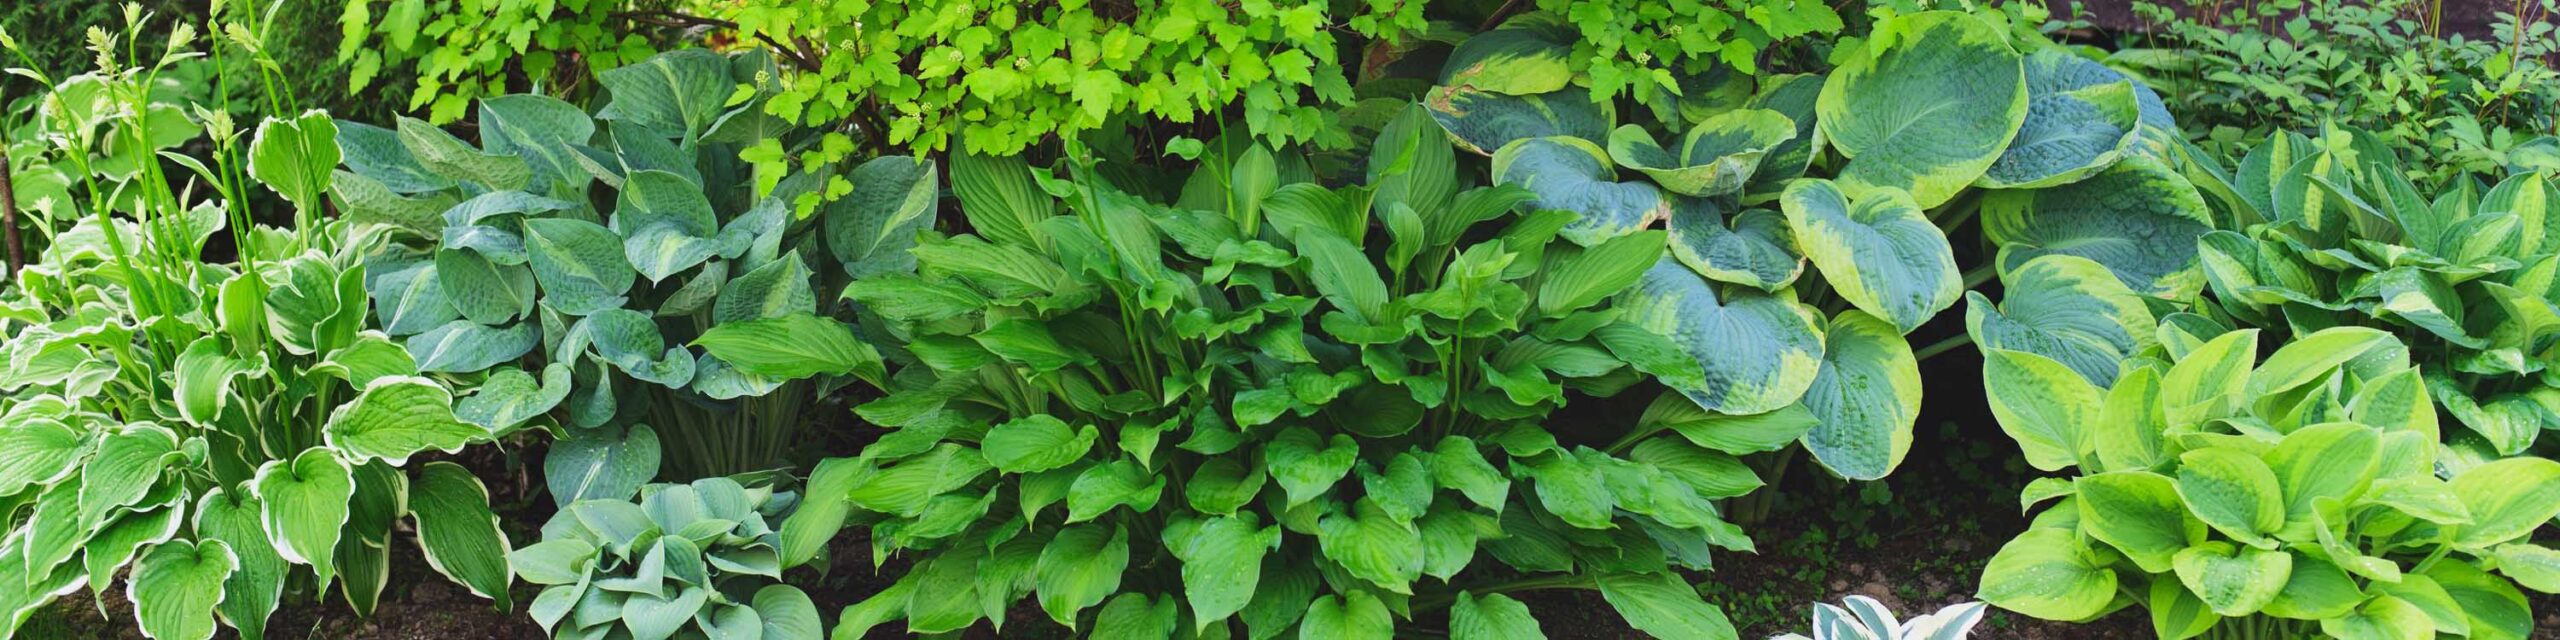 Cropped in area of a shade garden showing hostas and other plants.